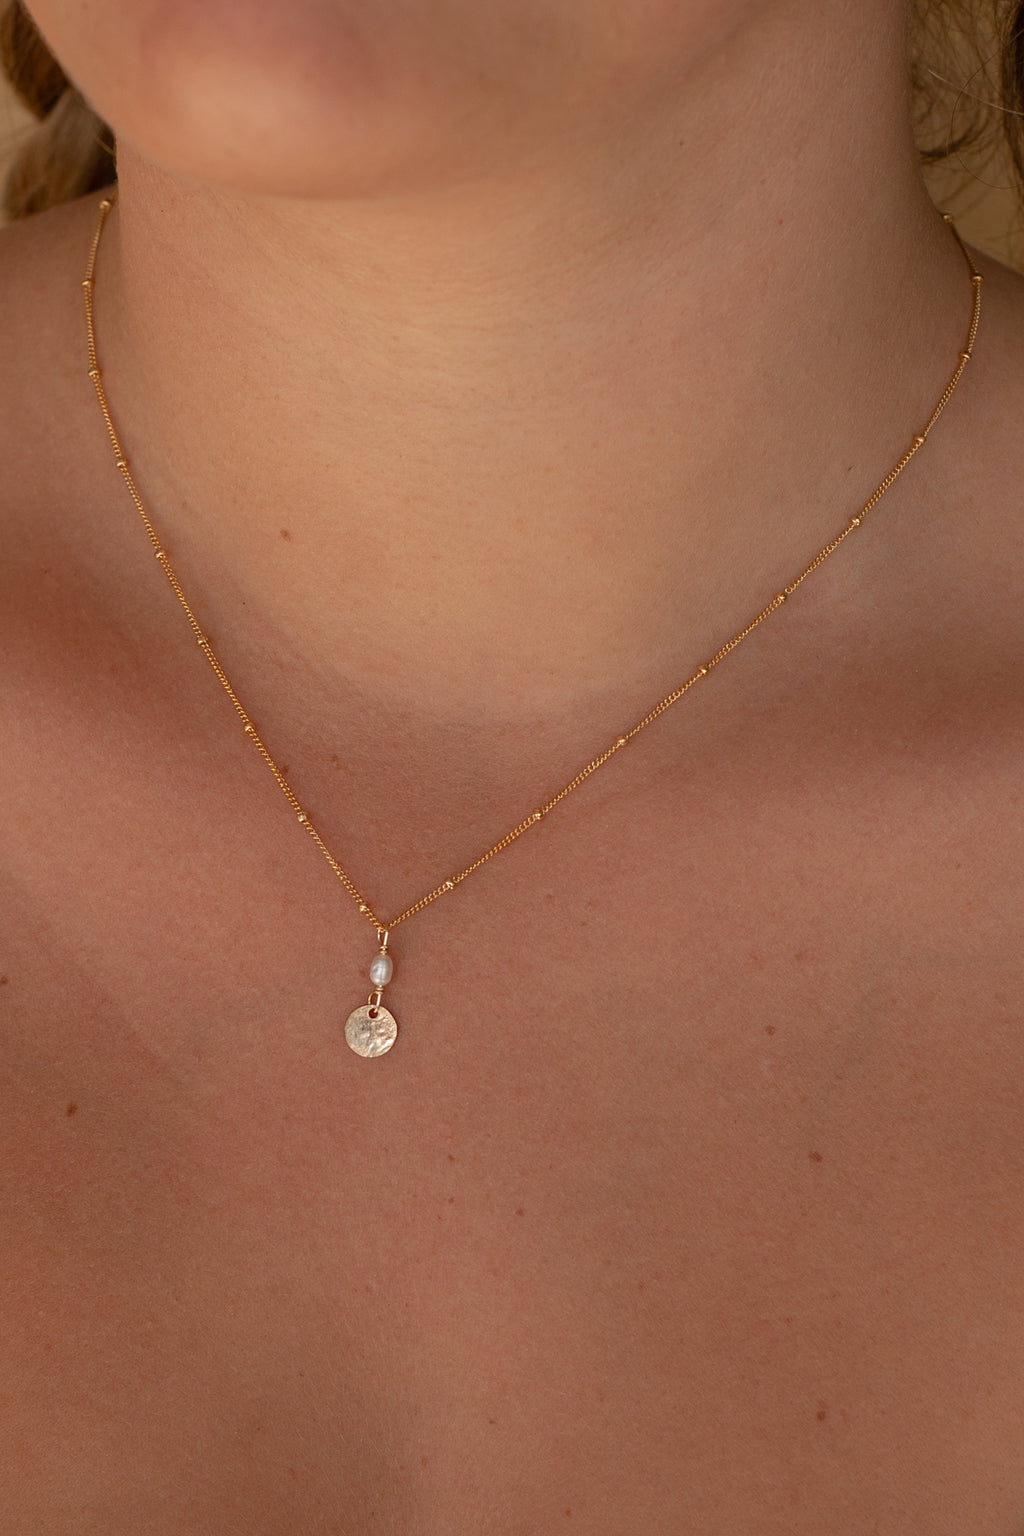 Pearl Small Moon Necklace- Satellite-Gold fill